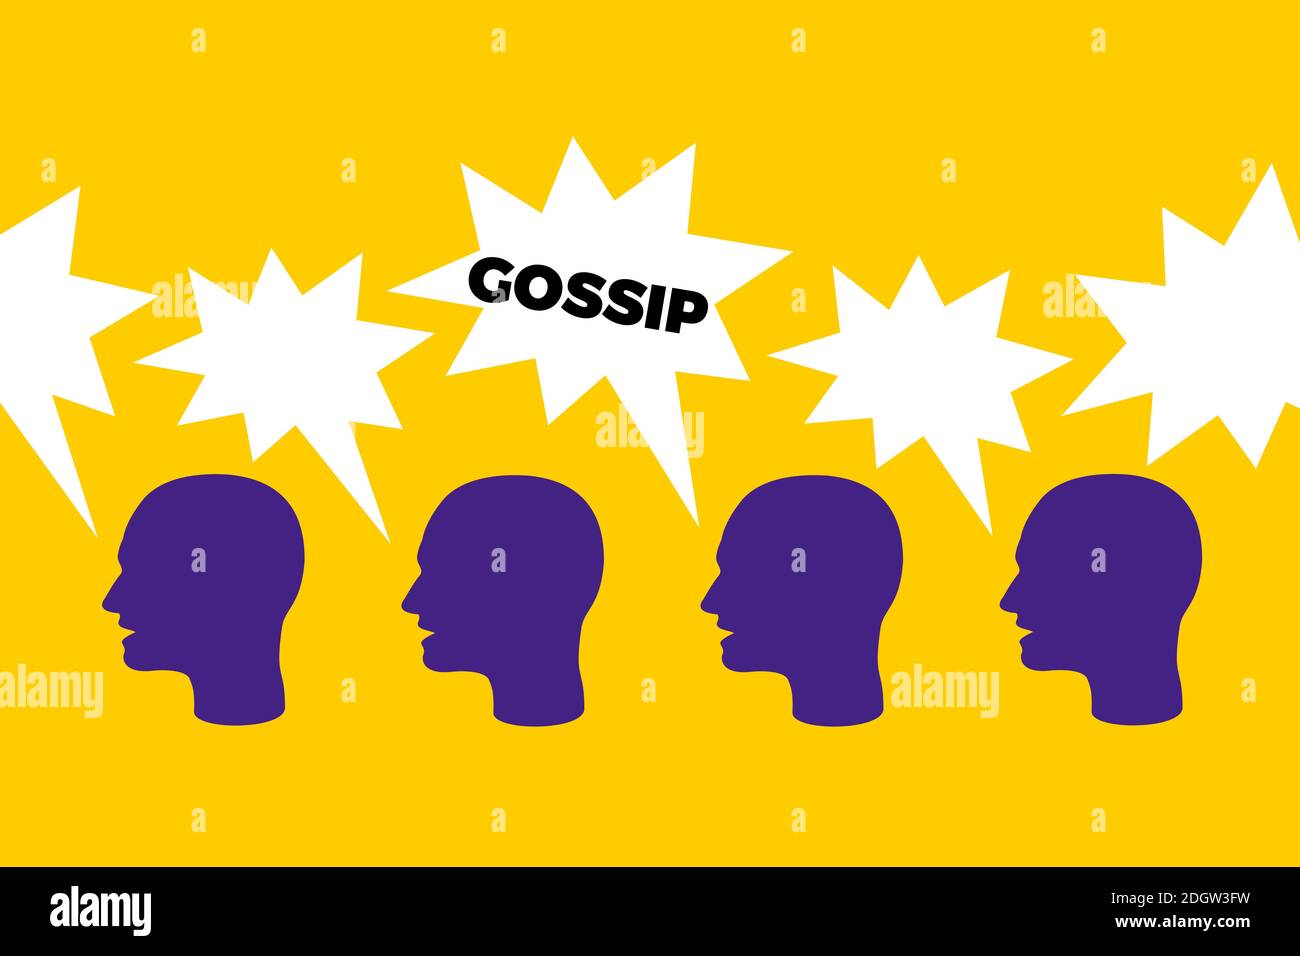 Gossip - organic spread of informal and negative information through social talking and speaking with people in the group. Verbal attack and assault t Stock Photo